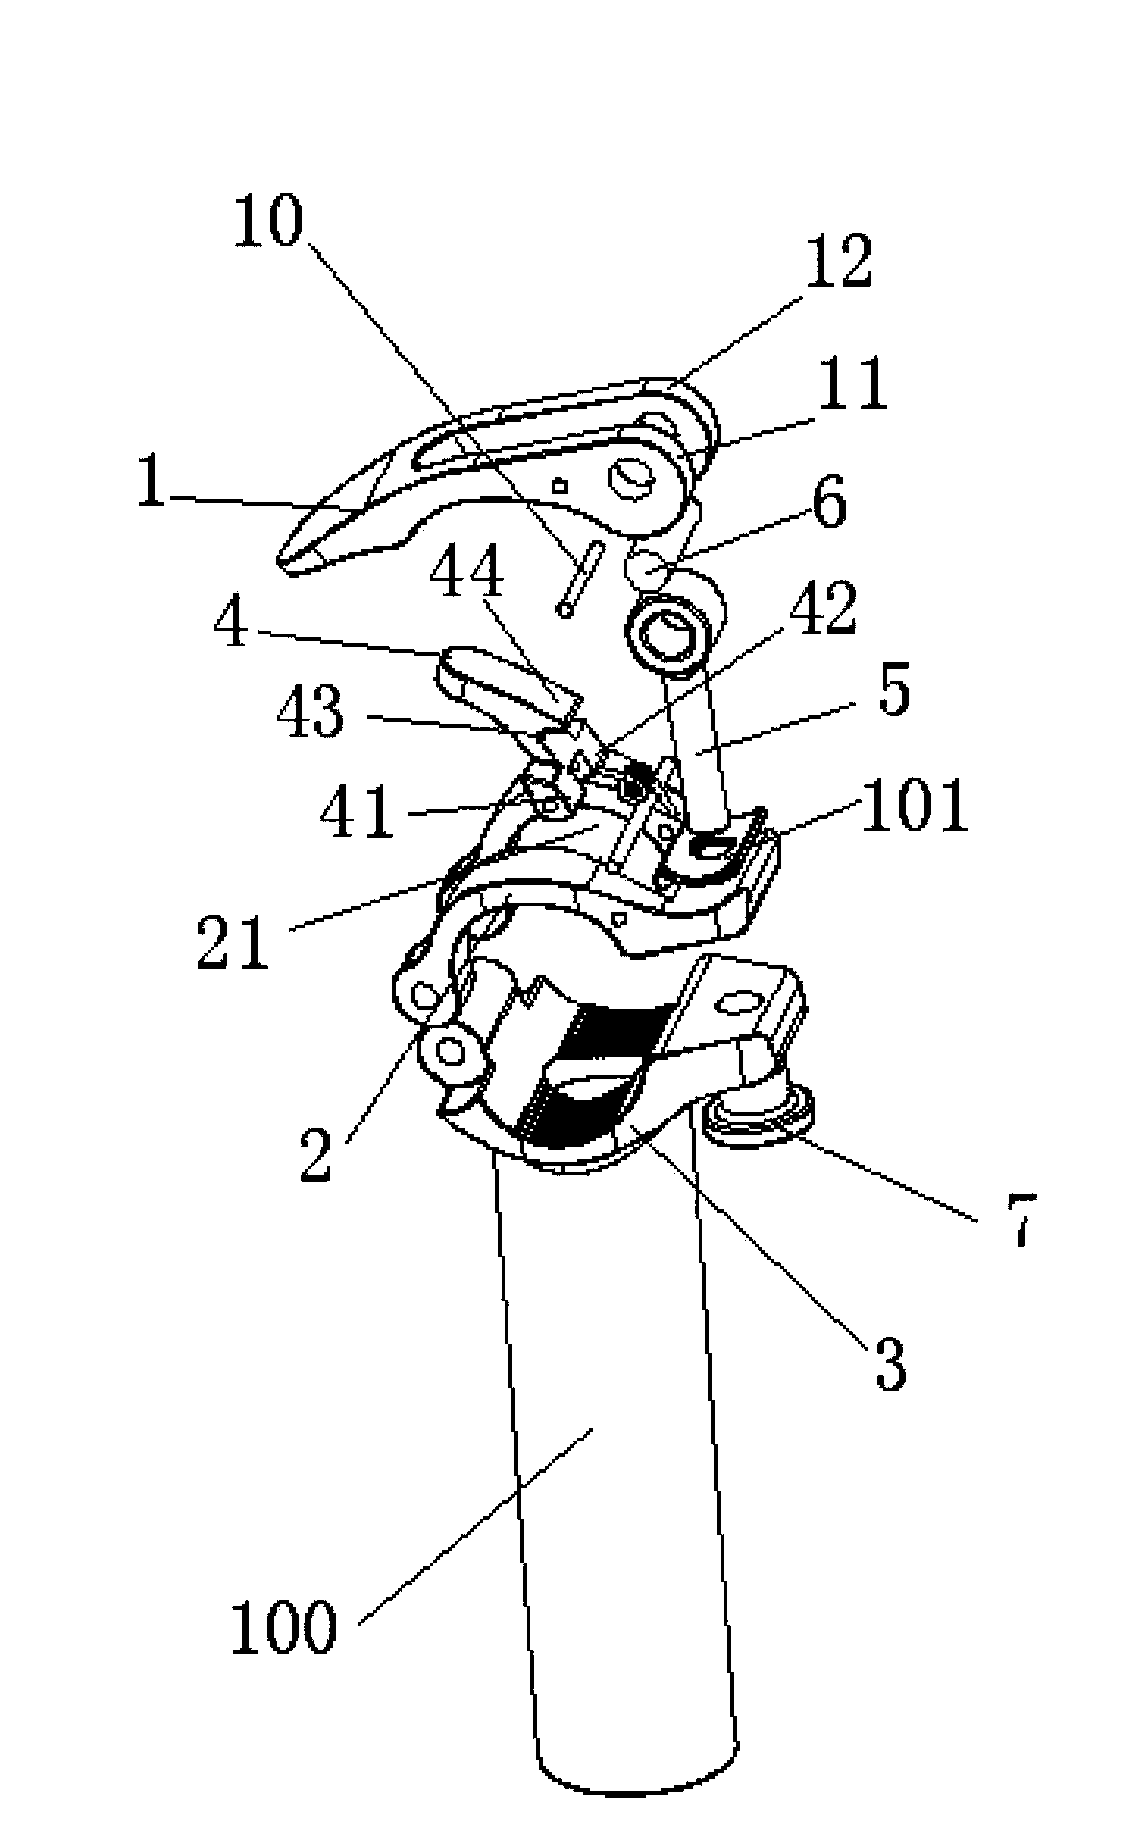 Anti-loosening mechanism for quick release component